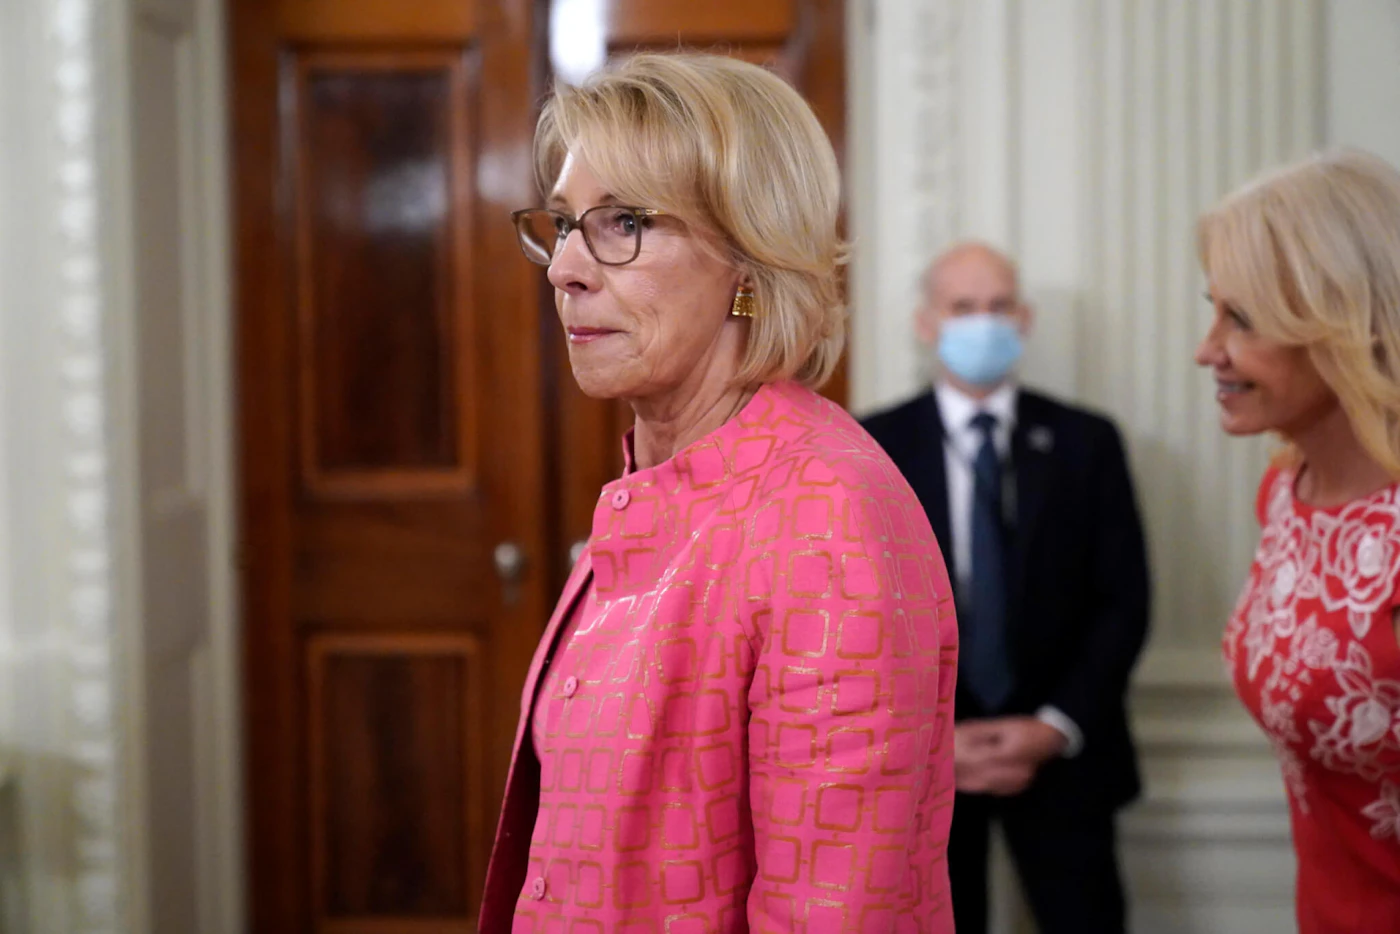 Education Secretary Betsy DeVos arrives for an event called "Kids First: Getting America's Children Safely Back to School" in the State Dining room of the White House, Wednesday, Aug. 12, 2020, in Washington. (AP Photo/Andrew Harnik)